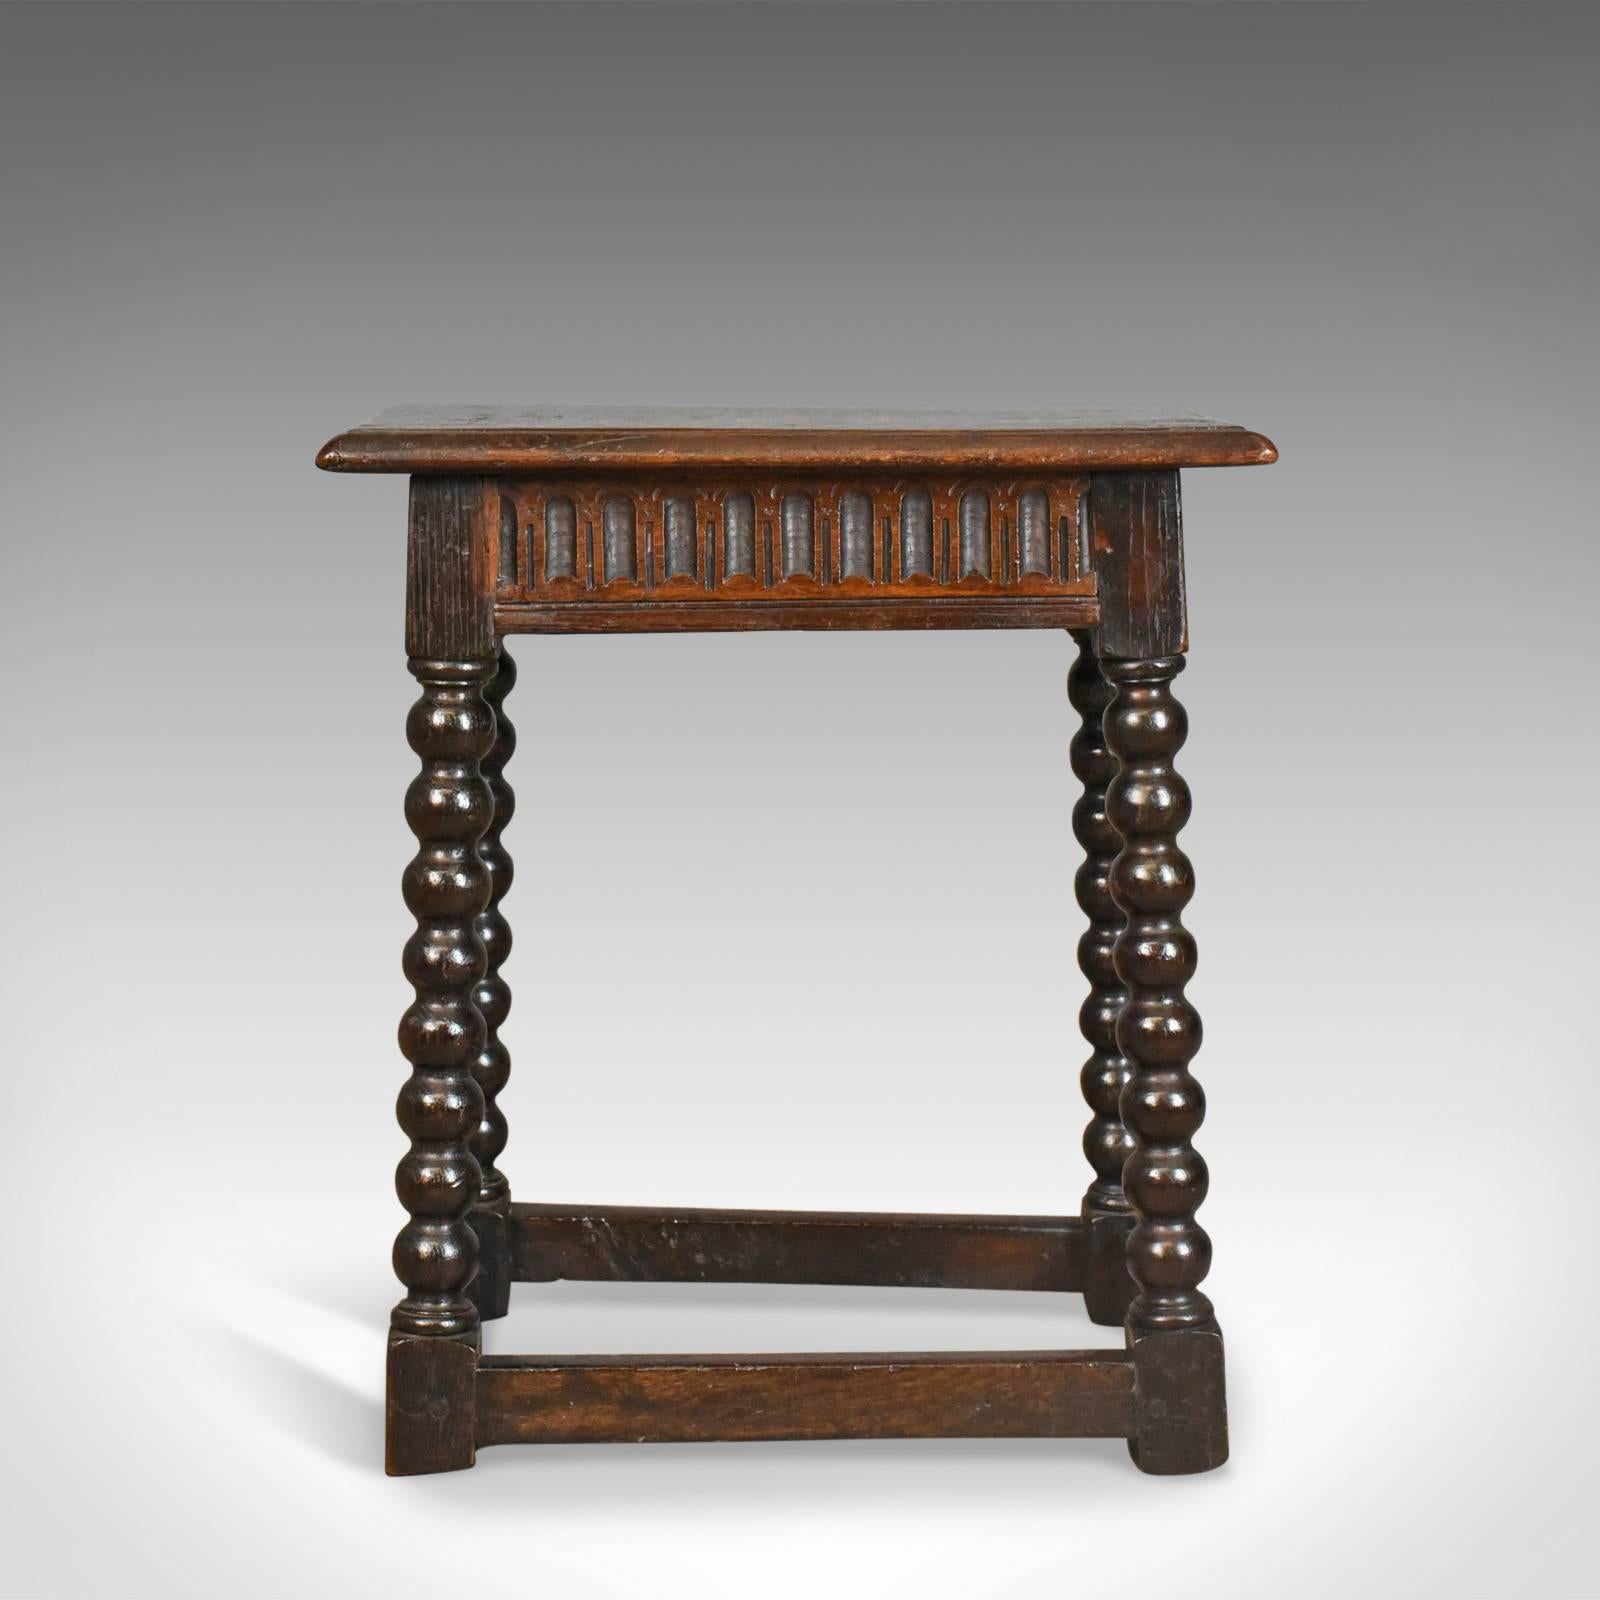 This is an antique joint stool. An English, late Georgian, oak seat dating to circa 1800.

Good consistent colour to the dark English oak 
Of quality craftsmanship displaying grain interest to the top
Solidly constructed with desirable aged